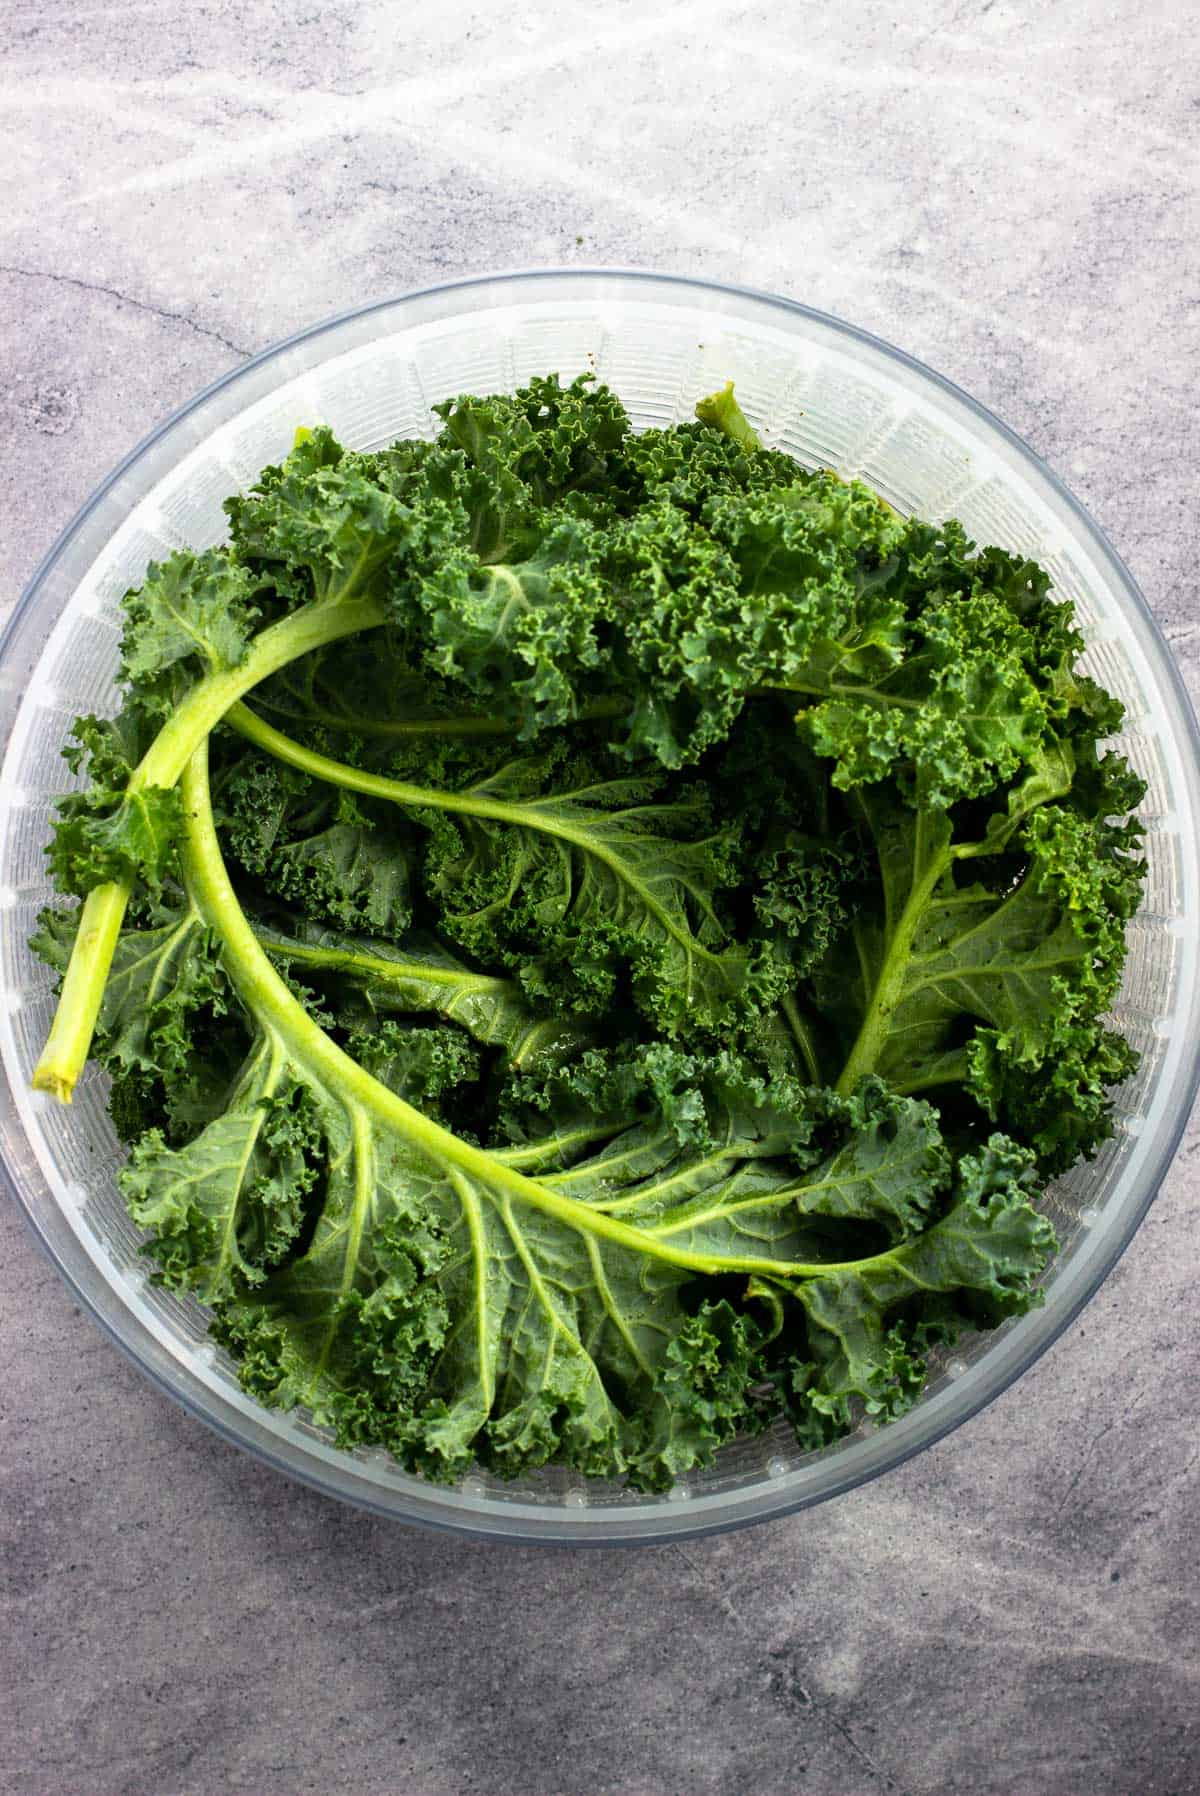 Whole kale leaves circled around a salad spinner.